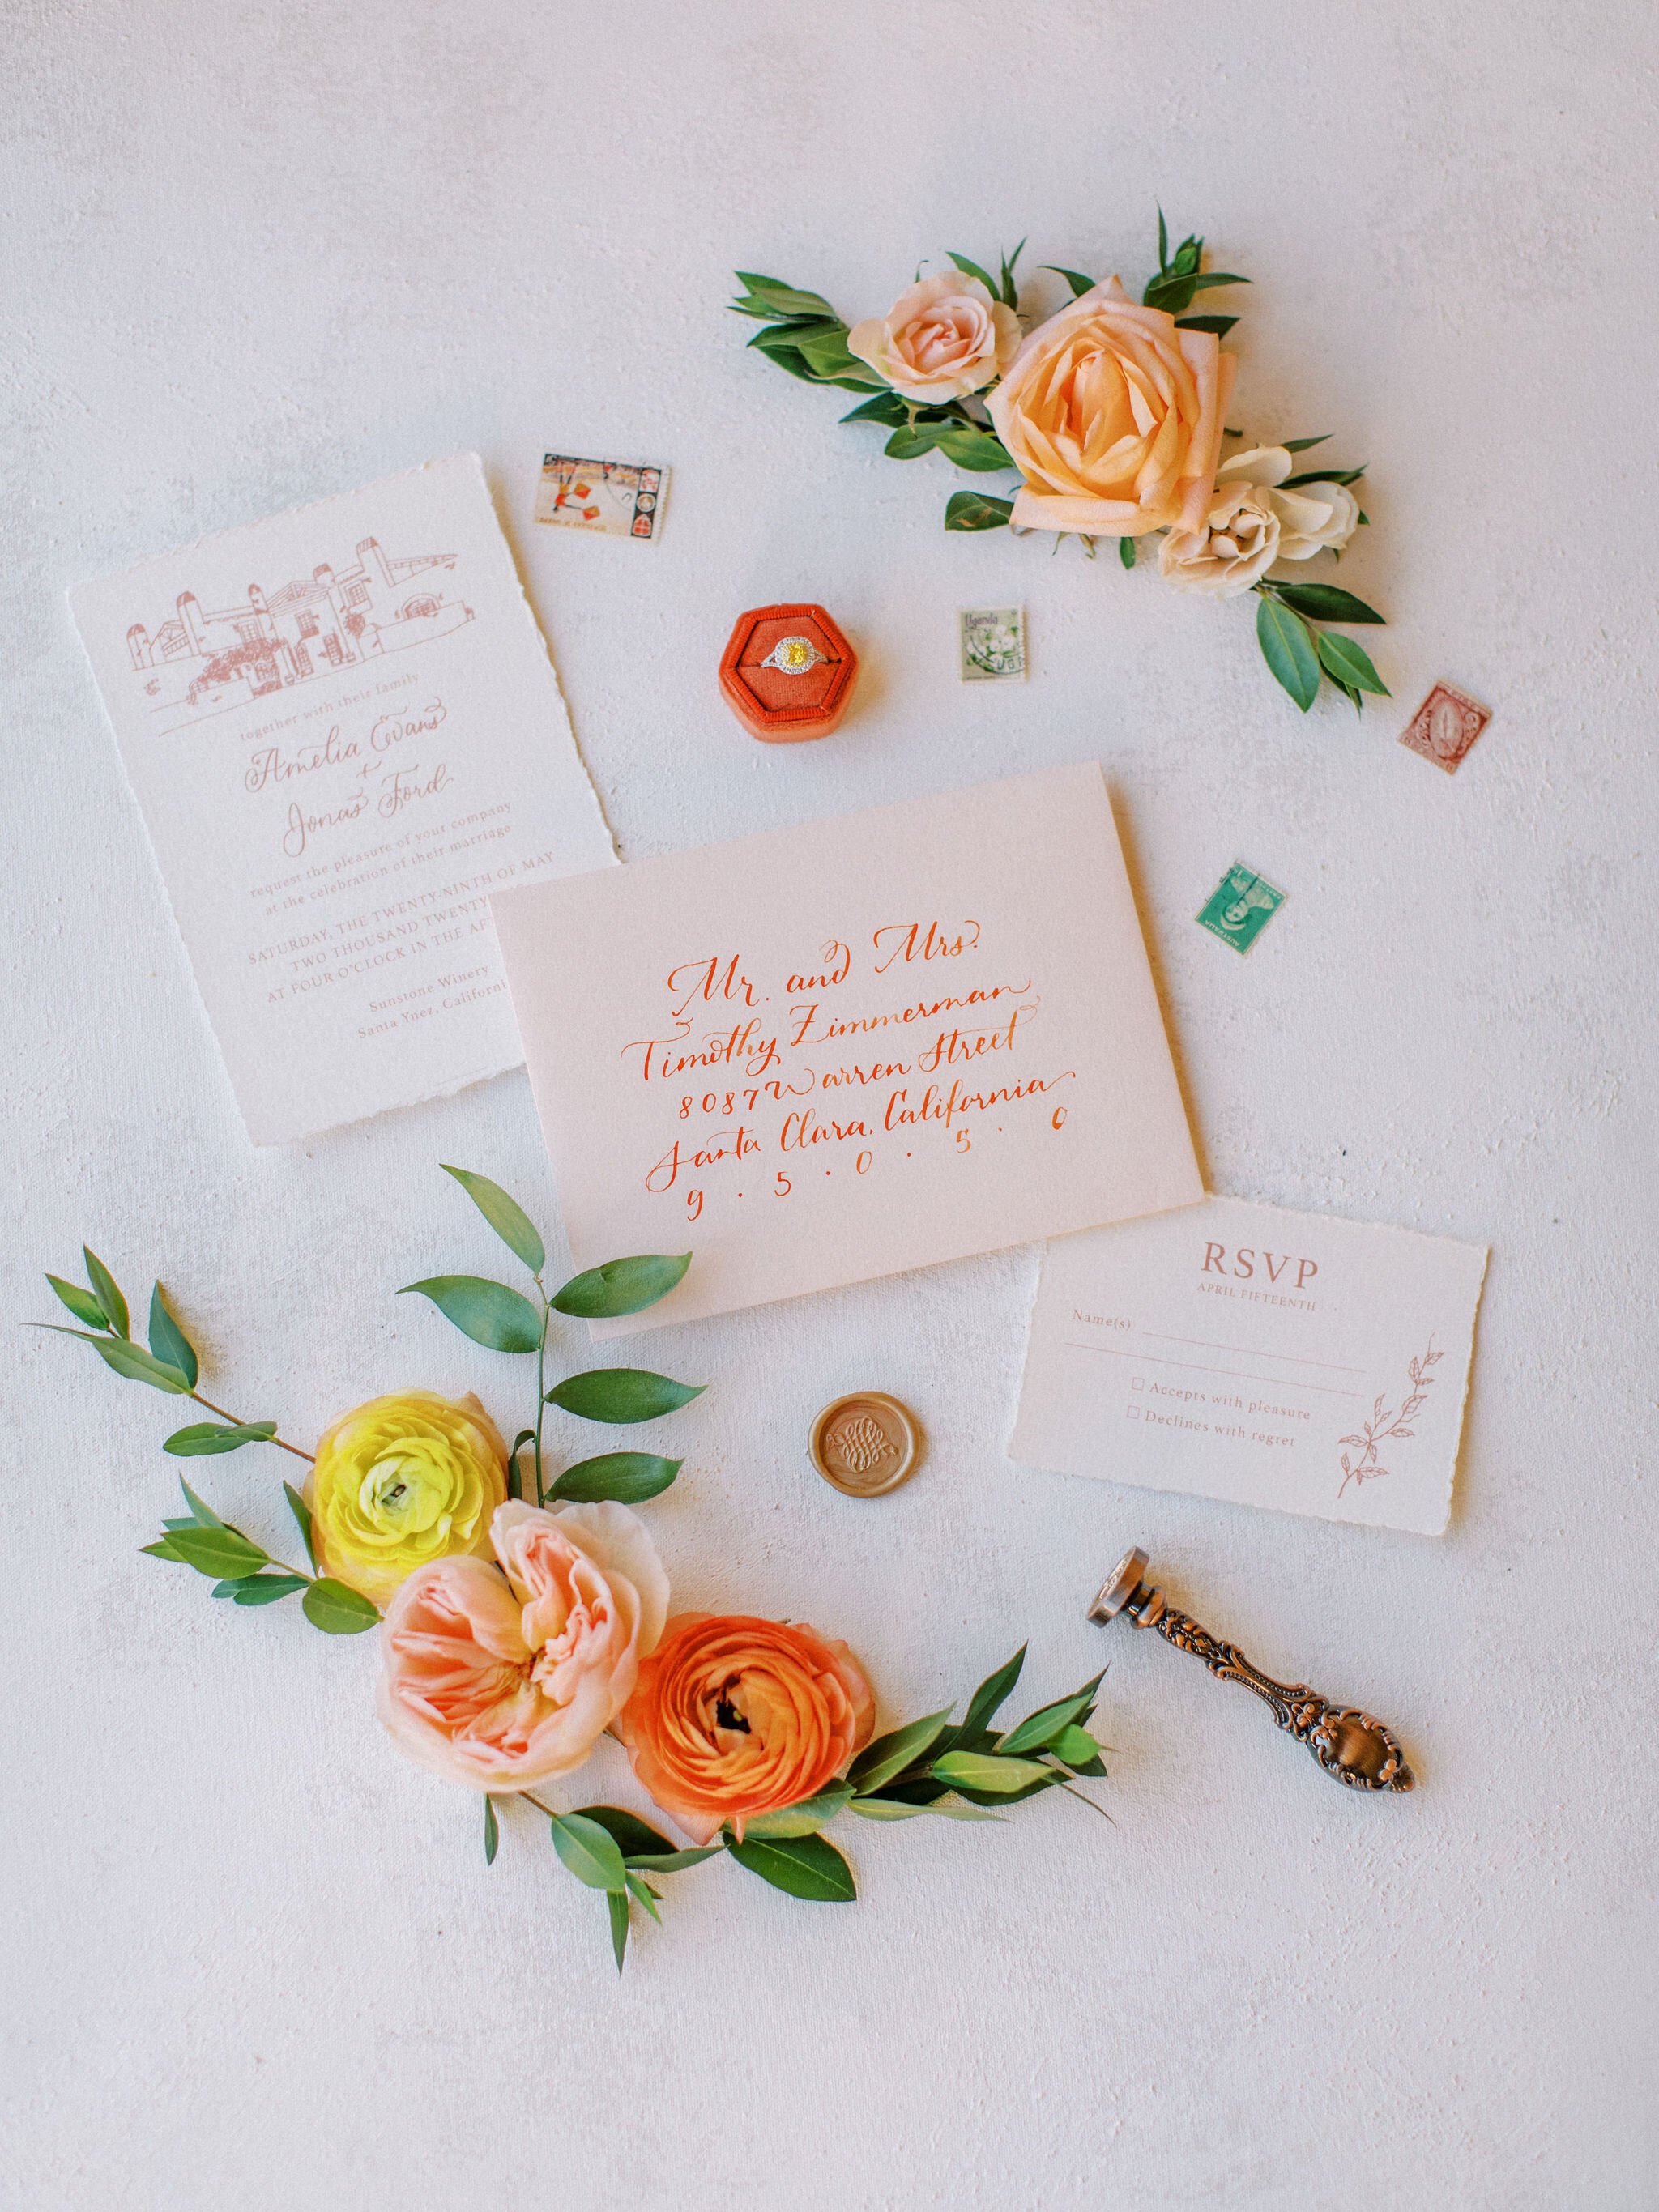 www.santabarbarawedding.com | Vivian Morrow | Sunstone Villa | H &amp; L Lovely Creations | Solstice Bloom | Chasing Stone | Claudia Strenger | The Mrs. Box | Wedding Invitations, Rings, and Florals